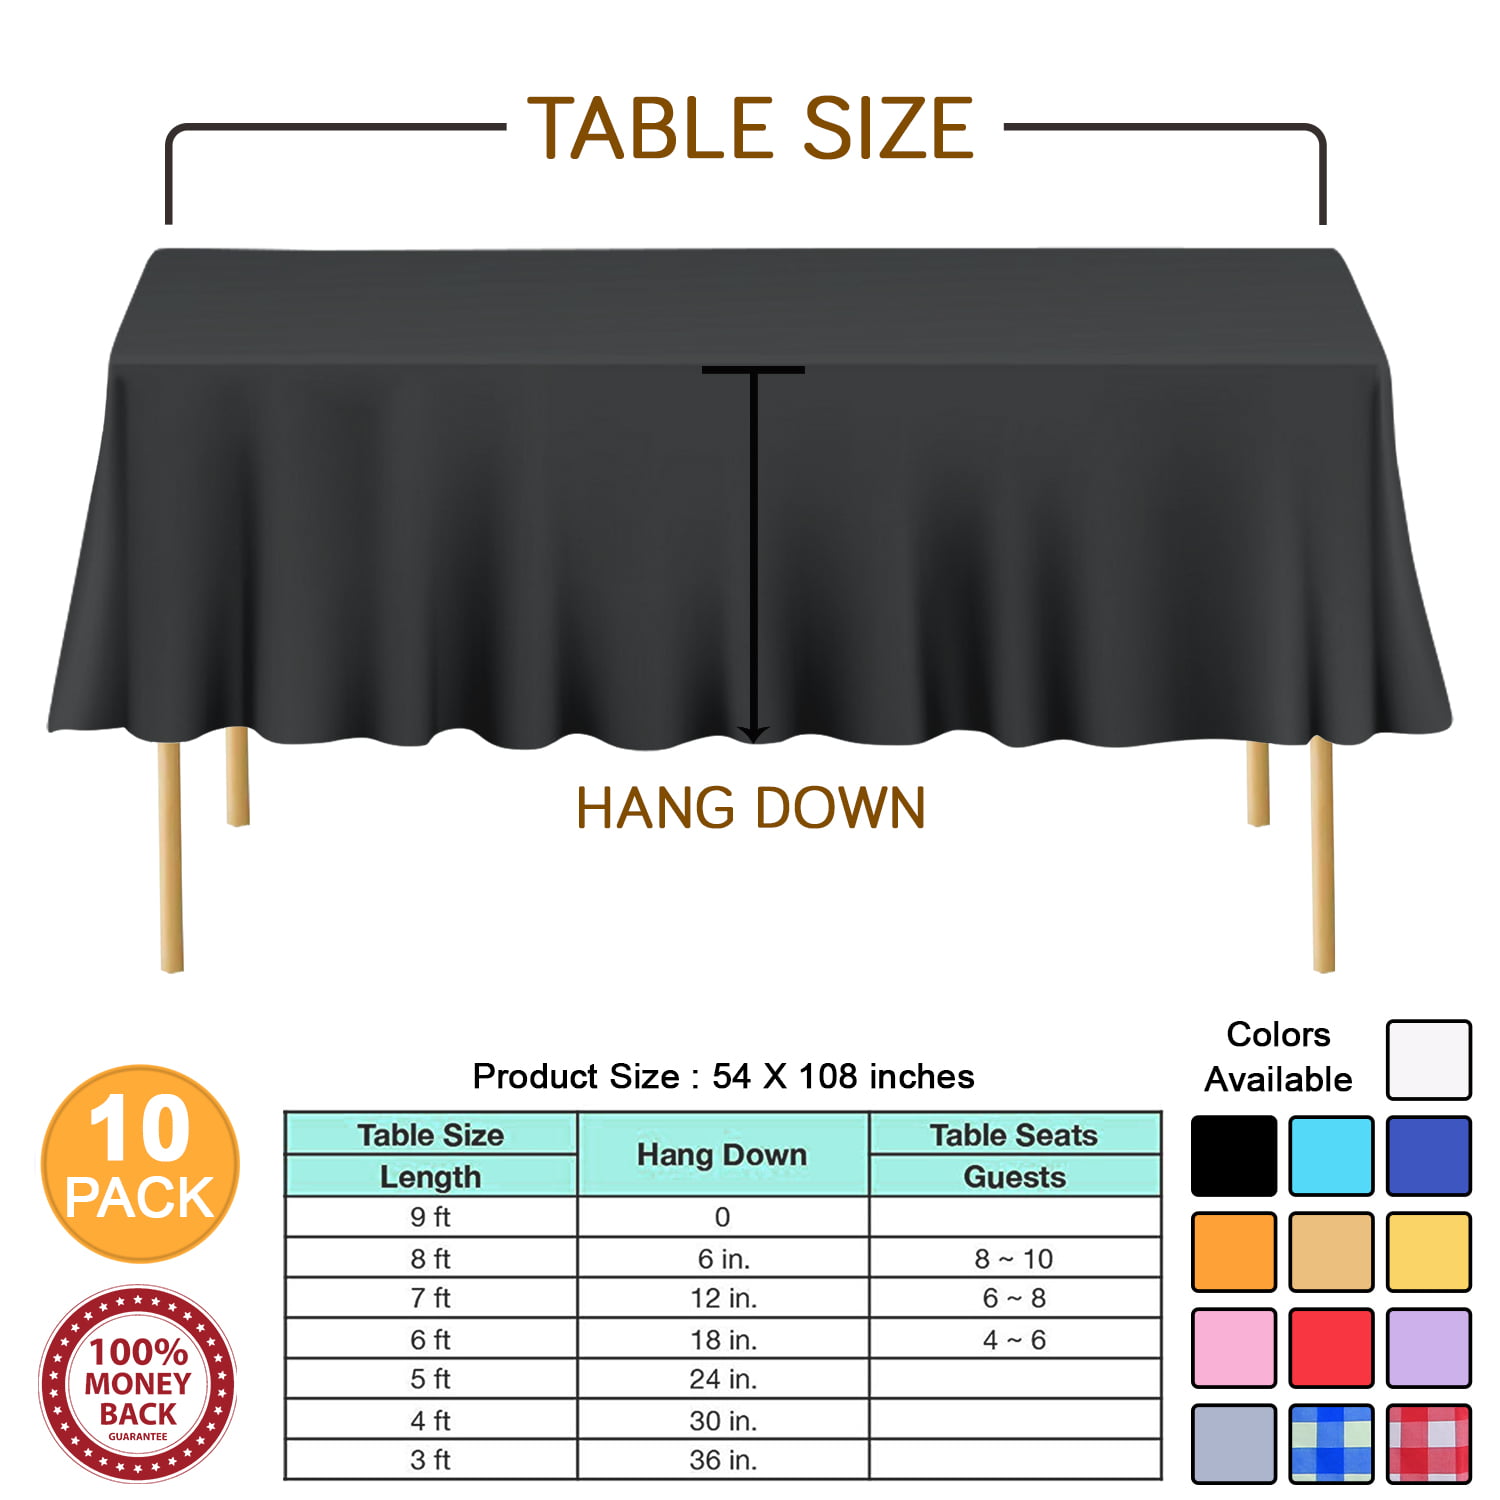 JINLE 6 Pack Disposable Tablecloths Plastic Rectangle Table Covers 54 x 108 Inch Table Cloths for Indoor or Outdoor Parties Birthdays Weddings Picnics Black 